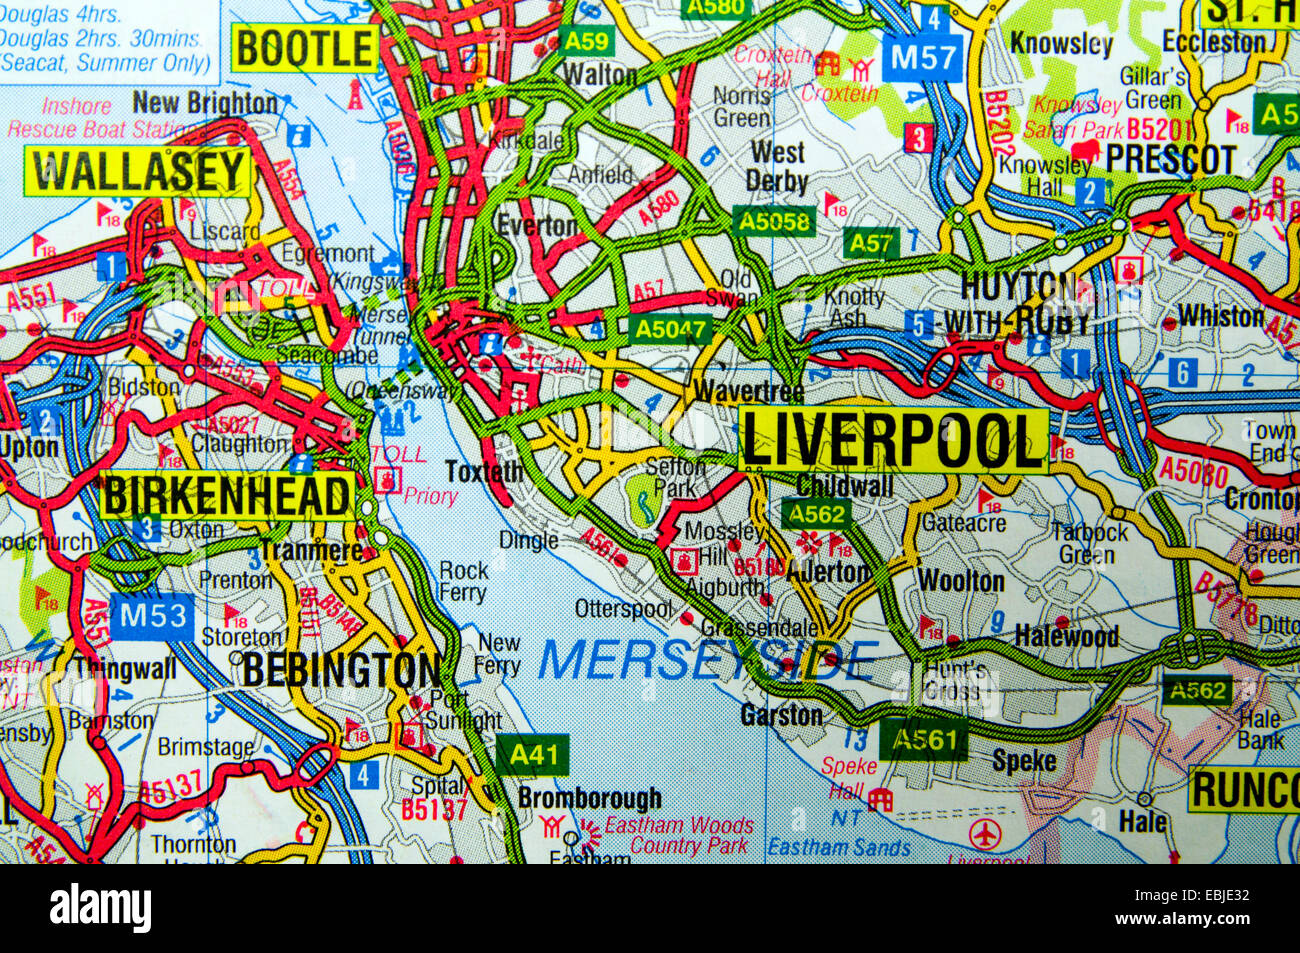 Road Map of Liverpool, England Stock Photo, Royalty Free Image